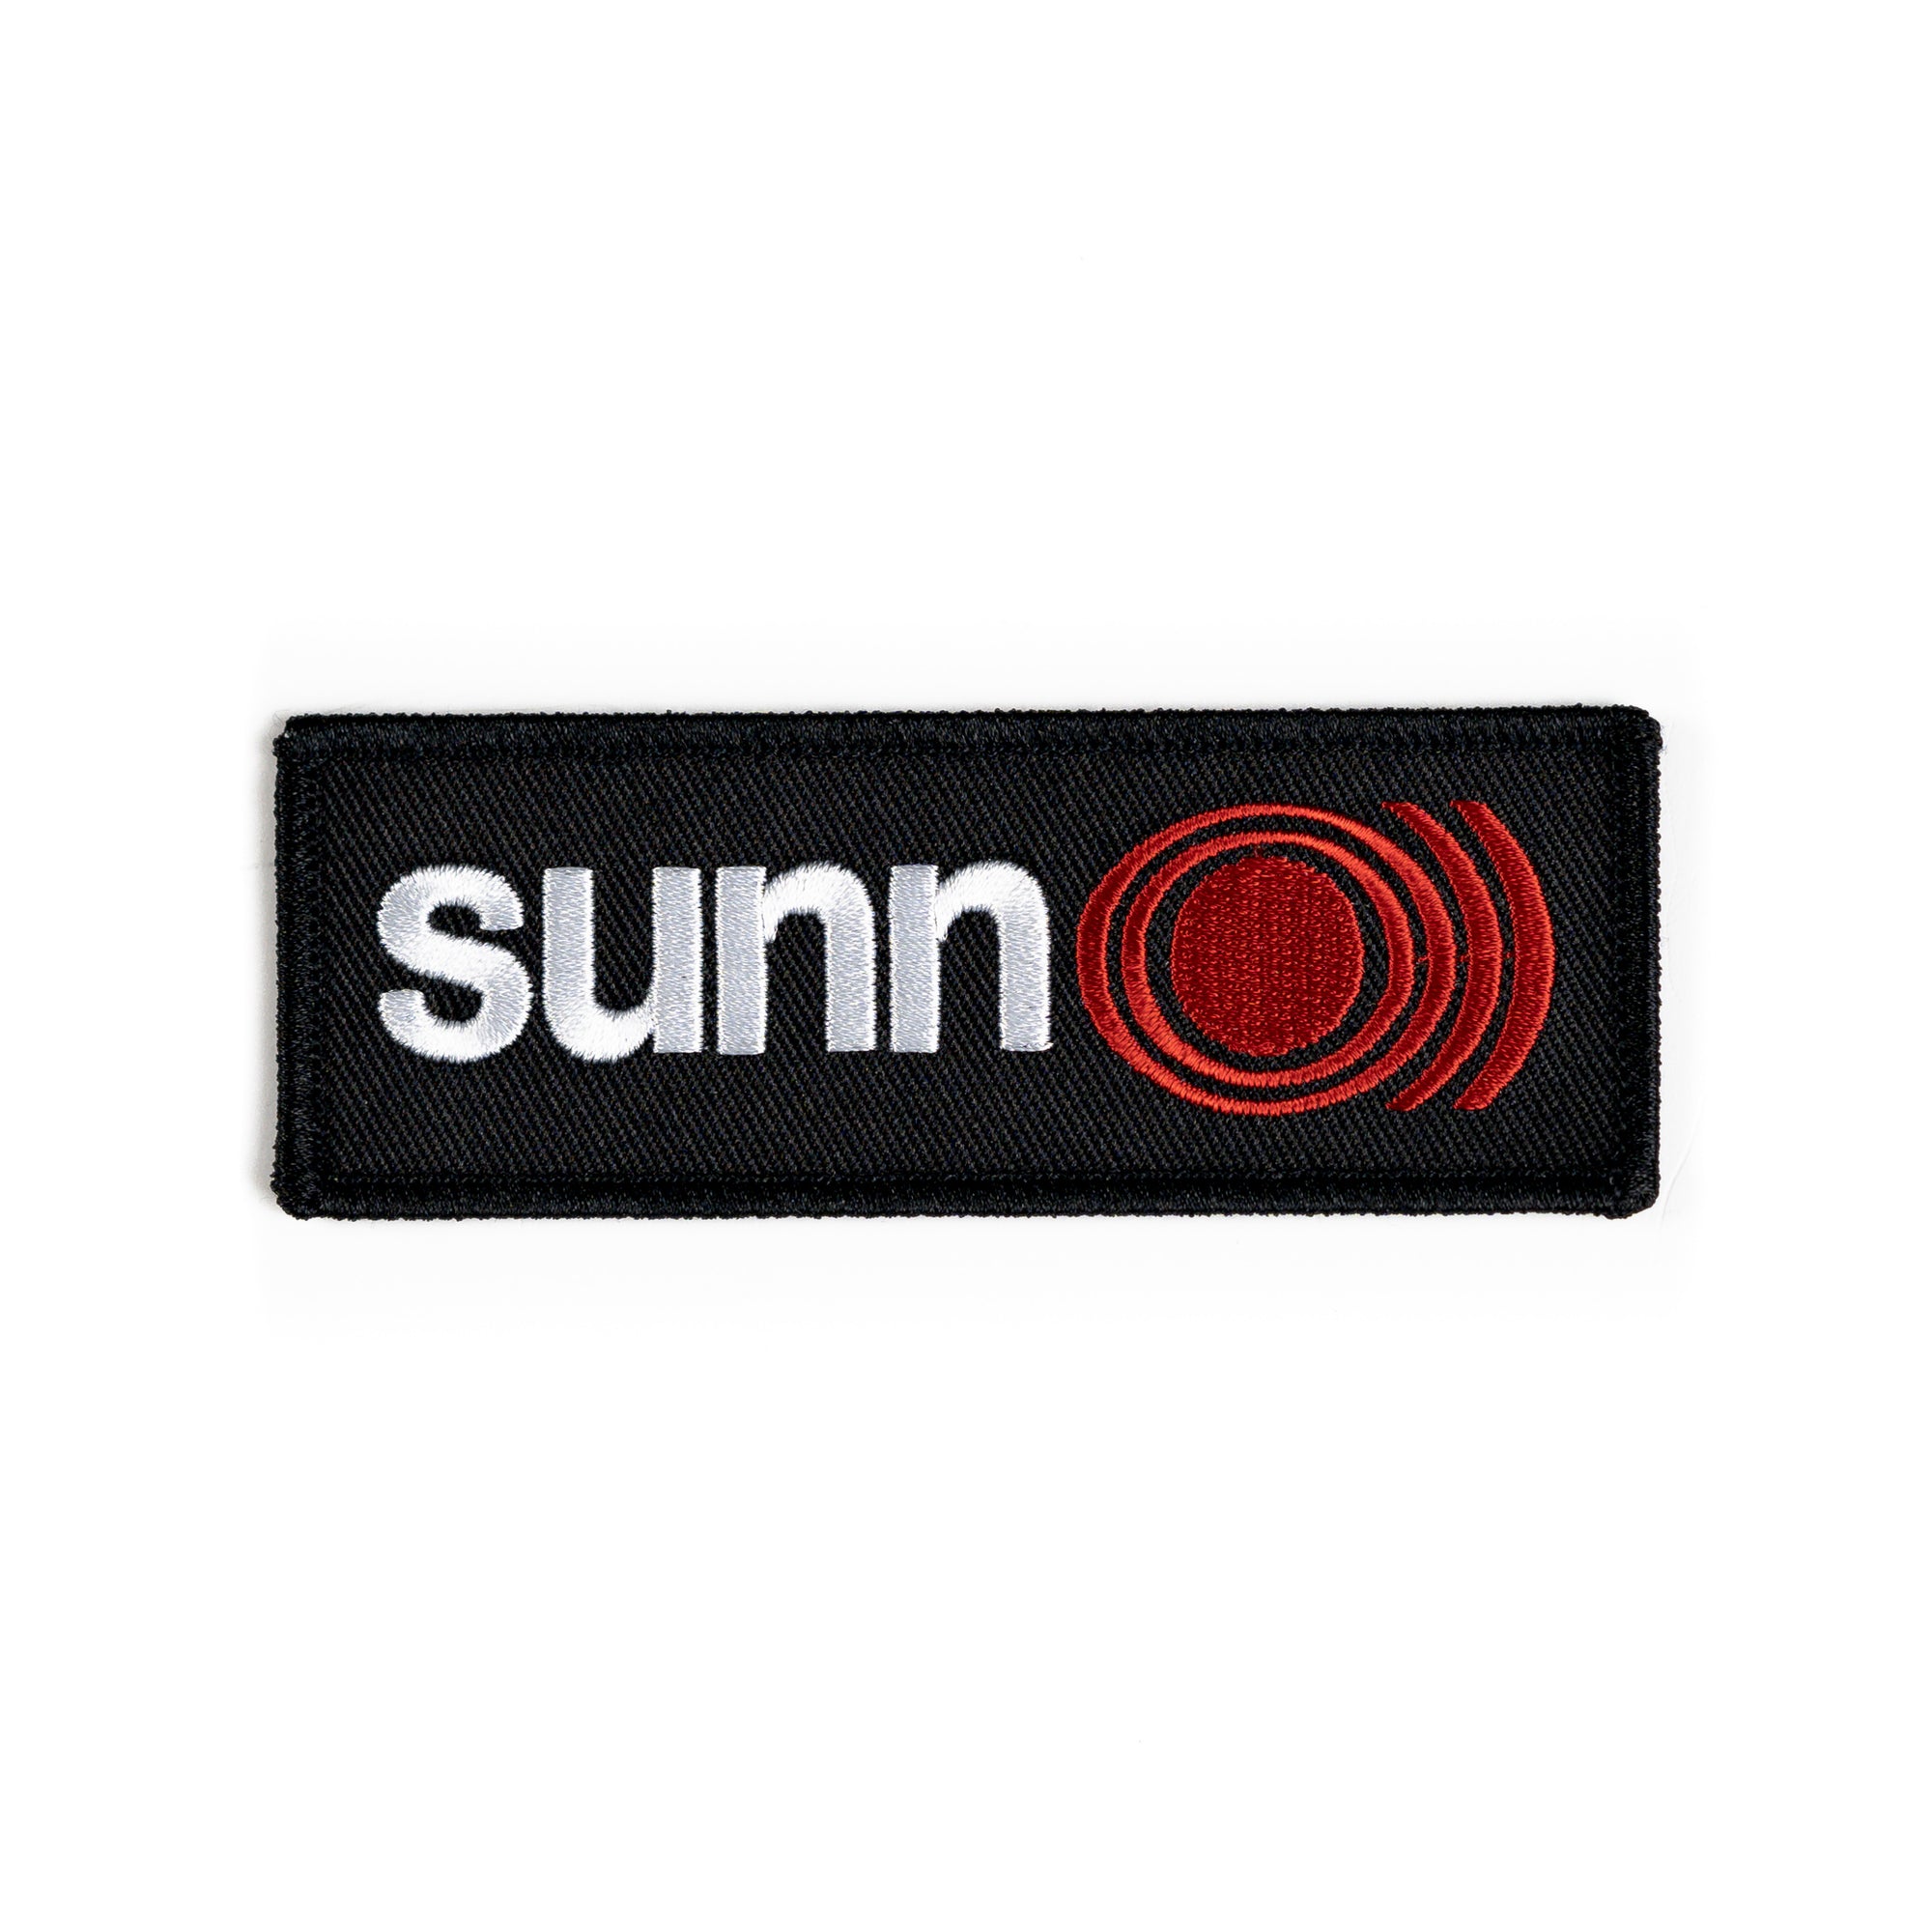 SUNN O))) "Logo" Embroidered Patch